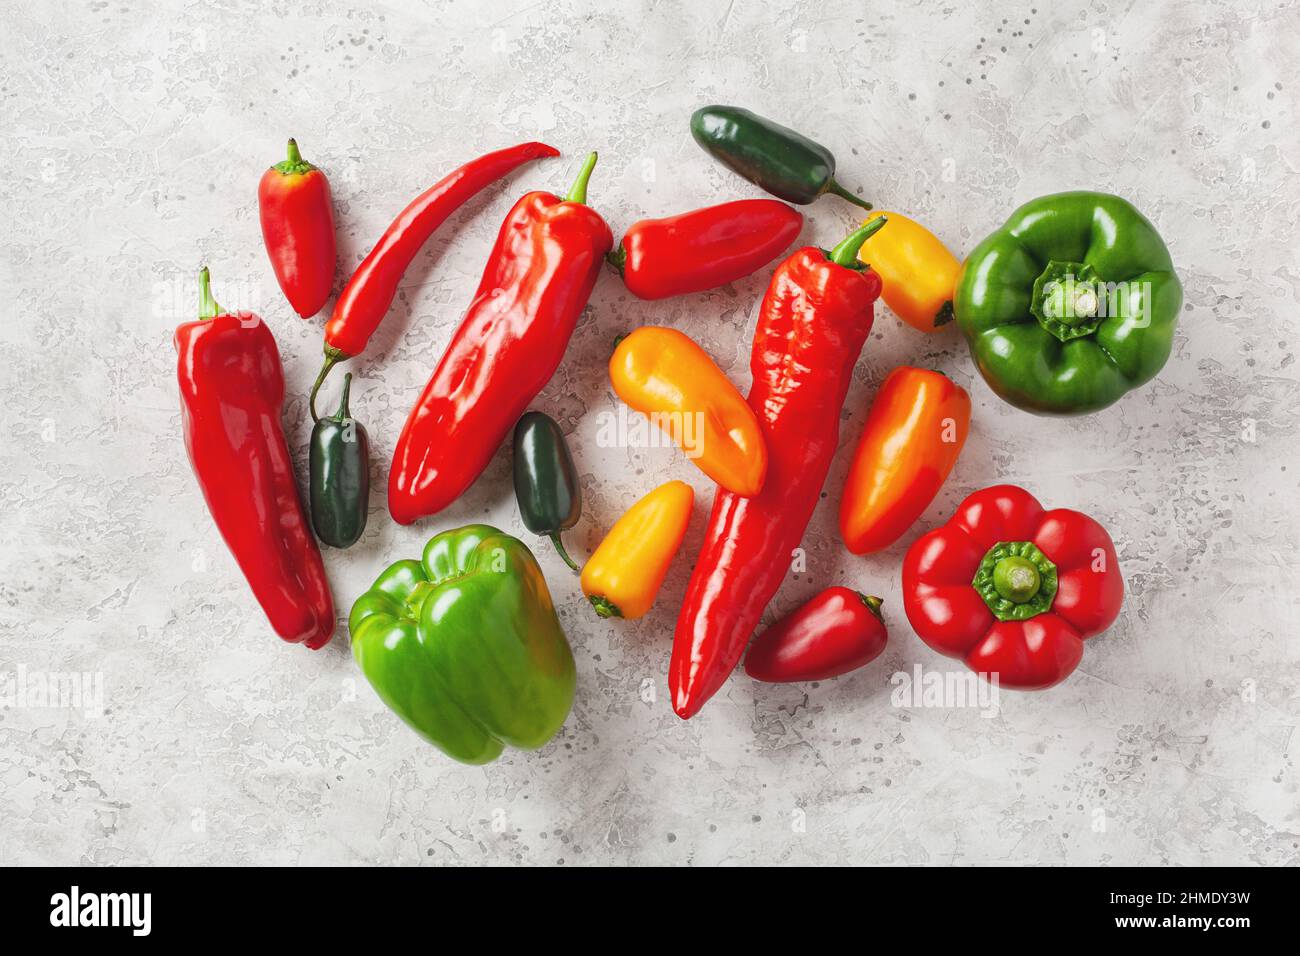 assorted red green and yellow bell peppers vegetables chili habanero Stock Photo